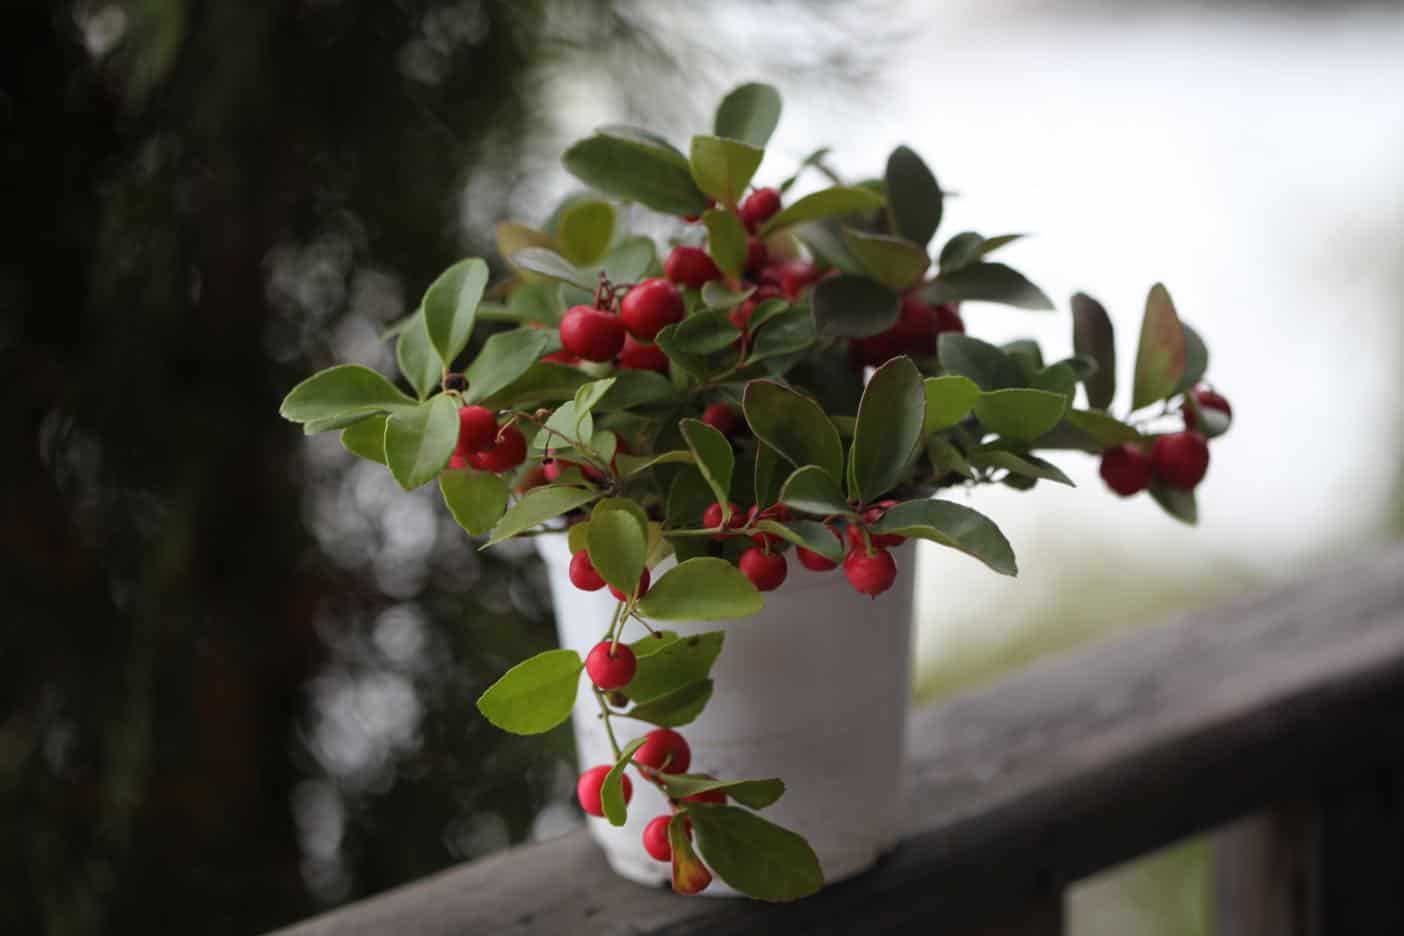 How to Grow Wintergreen? 